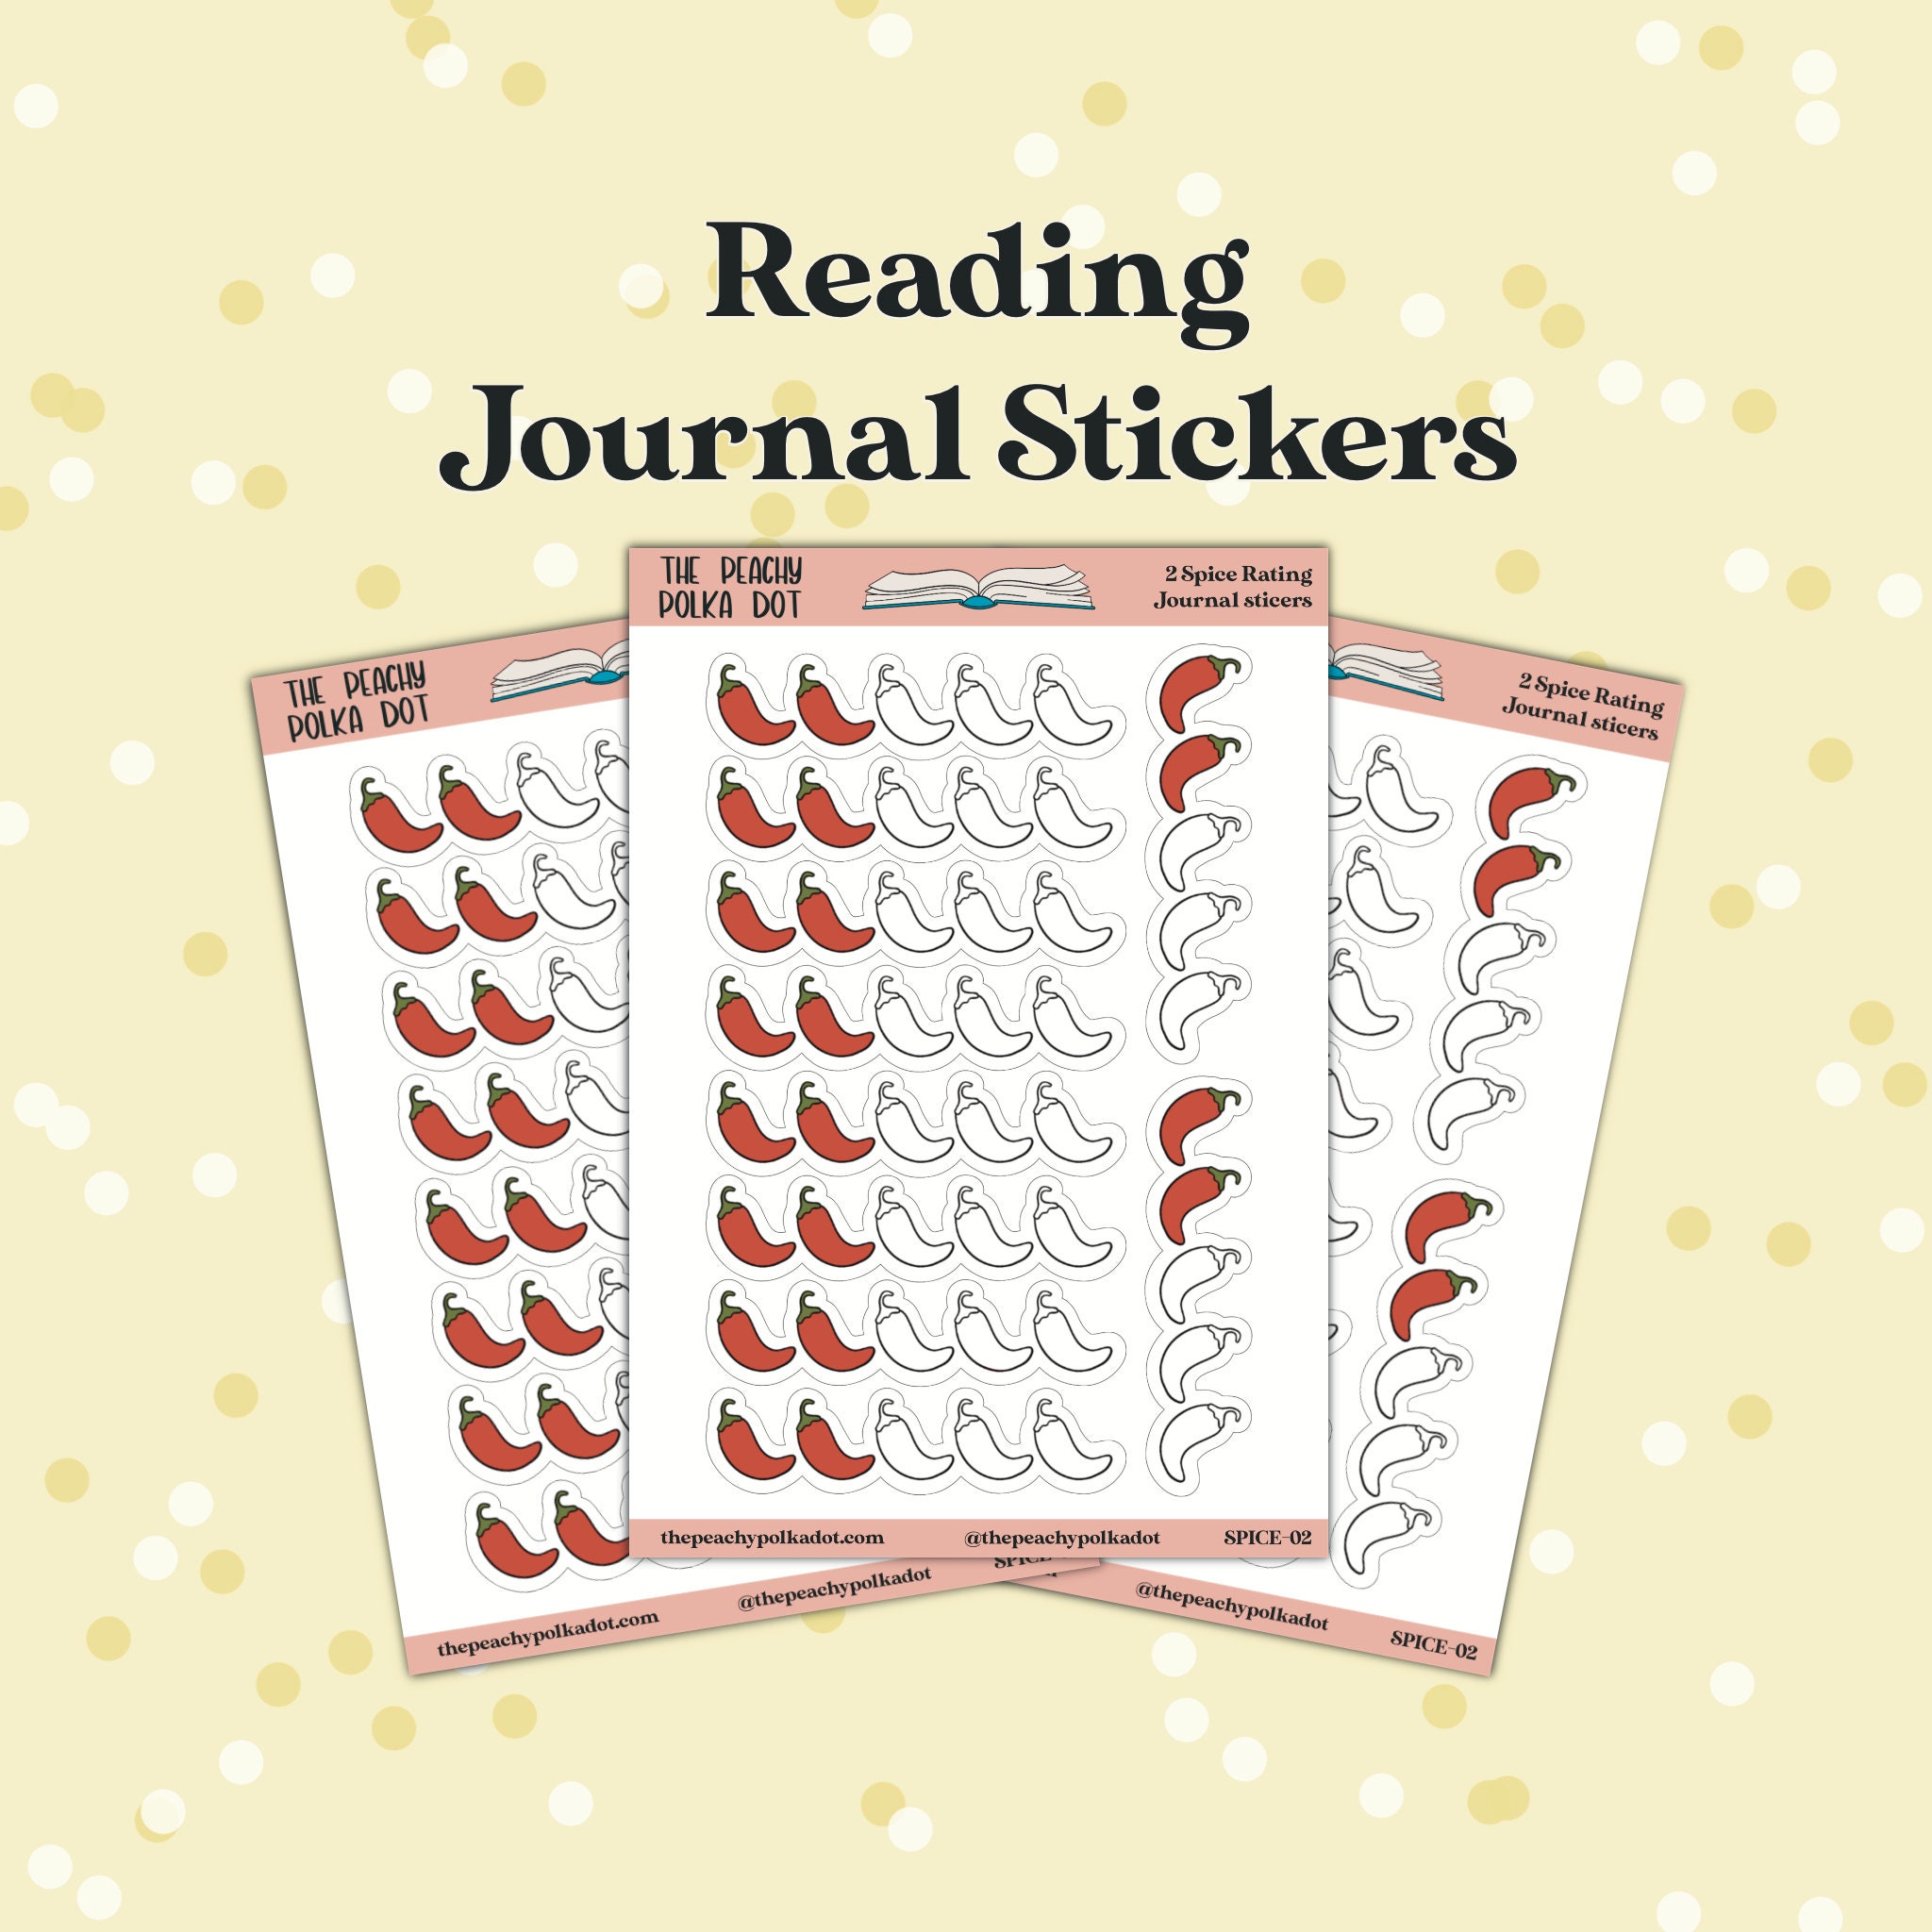 Spice Rating Journal Stickers, Reading Journal Sticker, Bookish Stickers, Journal  Sticker Sheet for Book Review, Booktok Journaling Sticker 